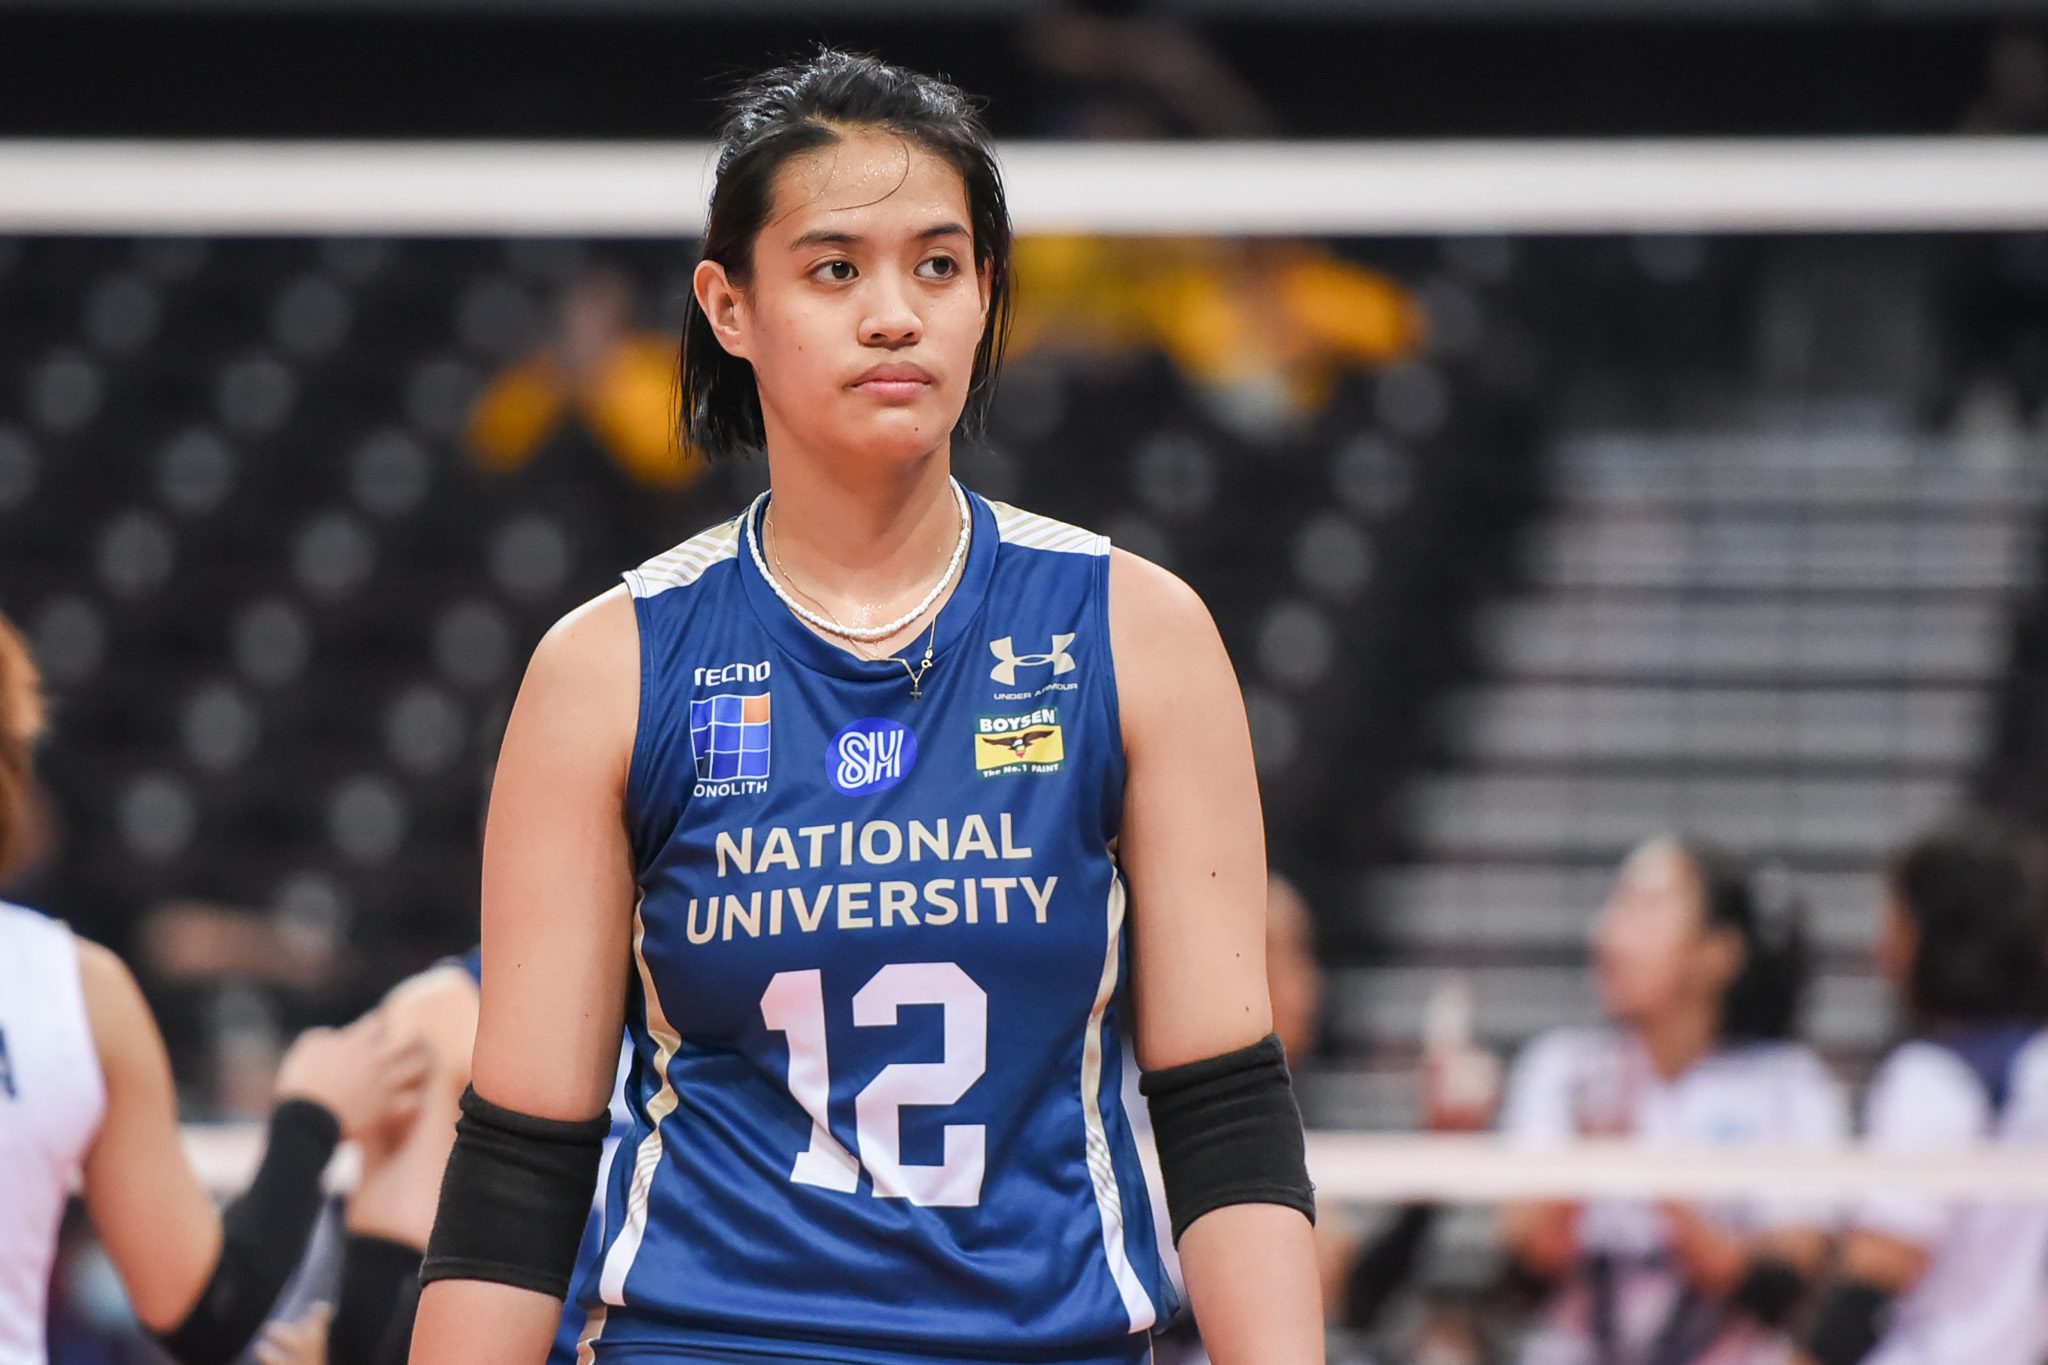 NU star Alyssa Solomon admits struggling with confidence after huge 28-point game